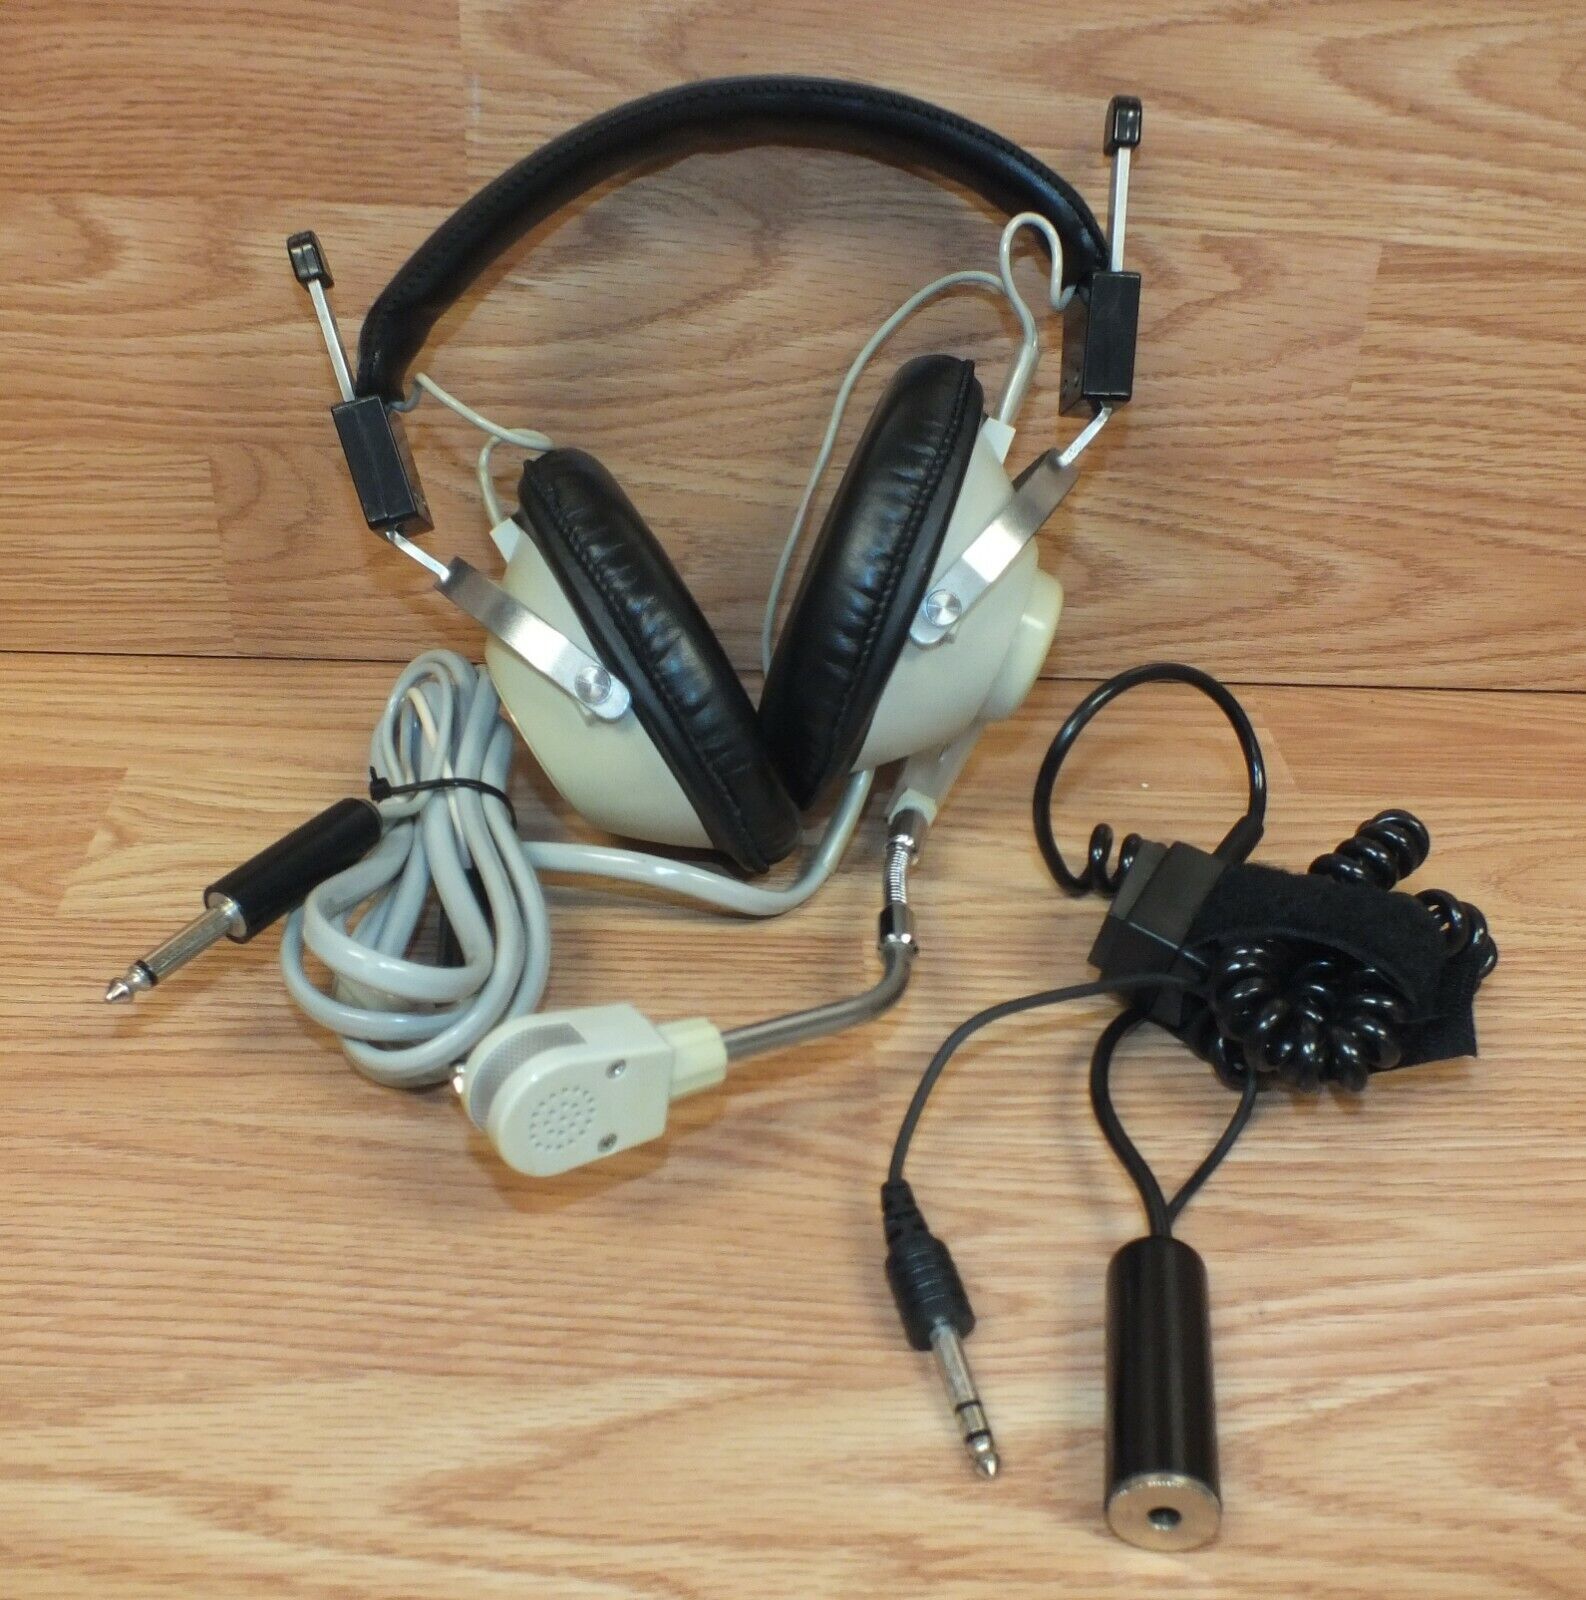 AirCom HSD Aviation Headphones W/ Boom Microphone & Pushbutton Activation Switch